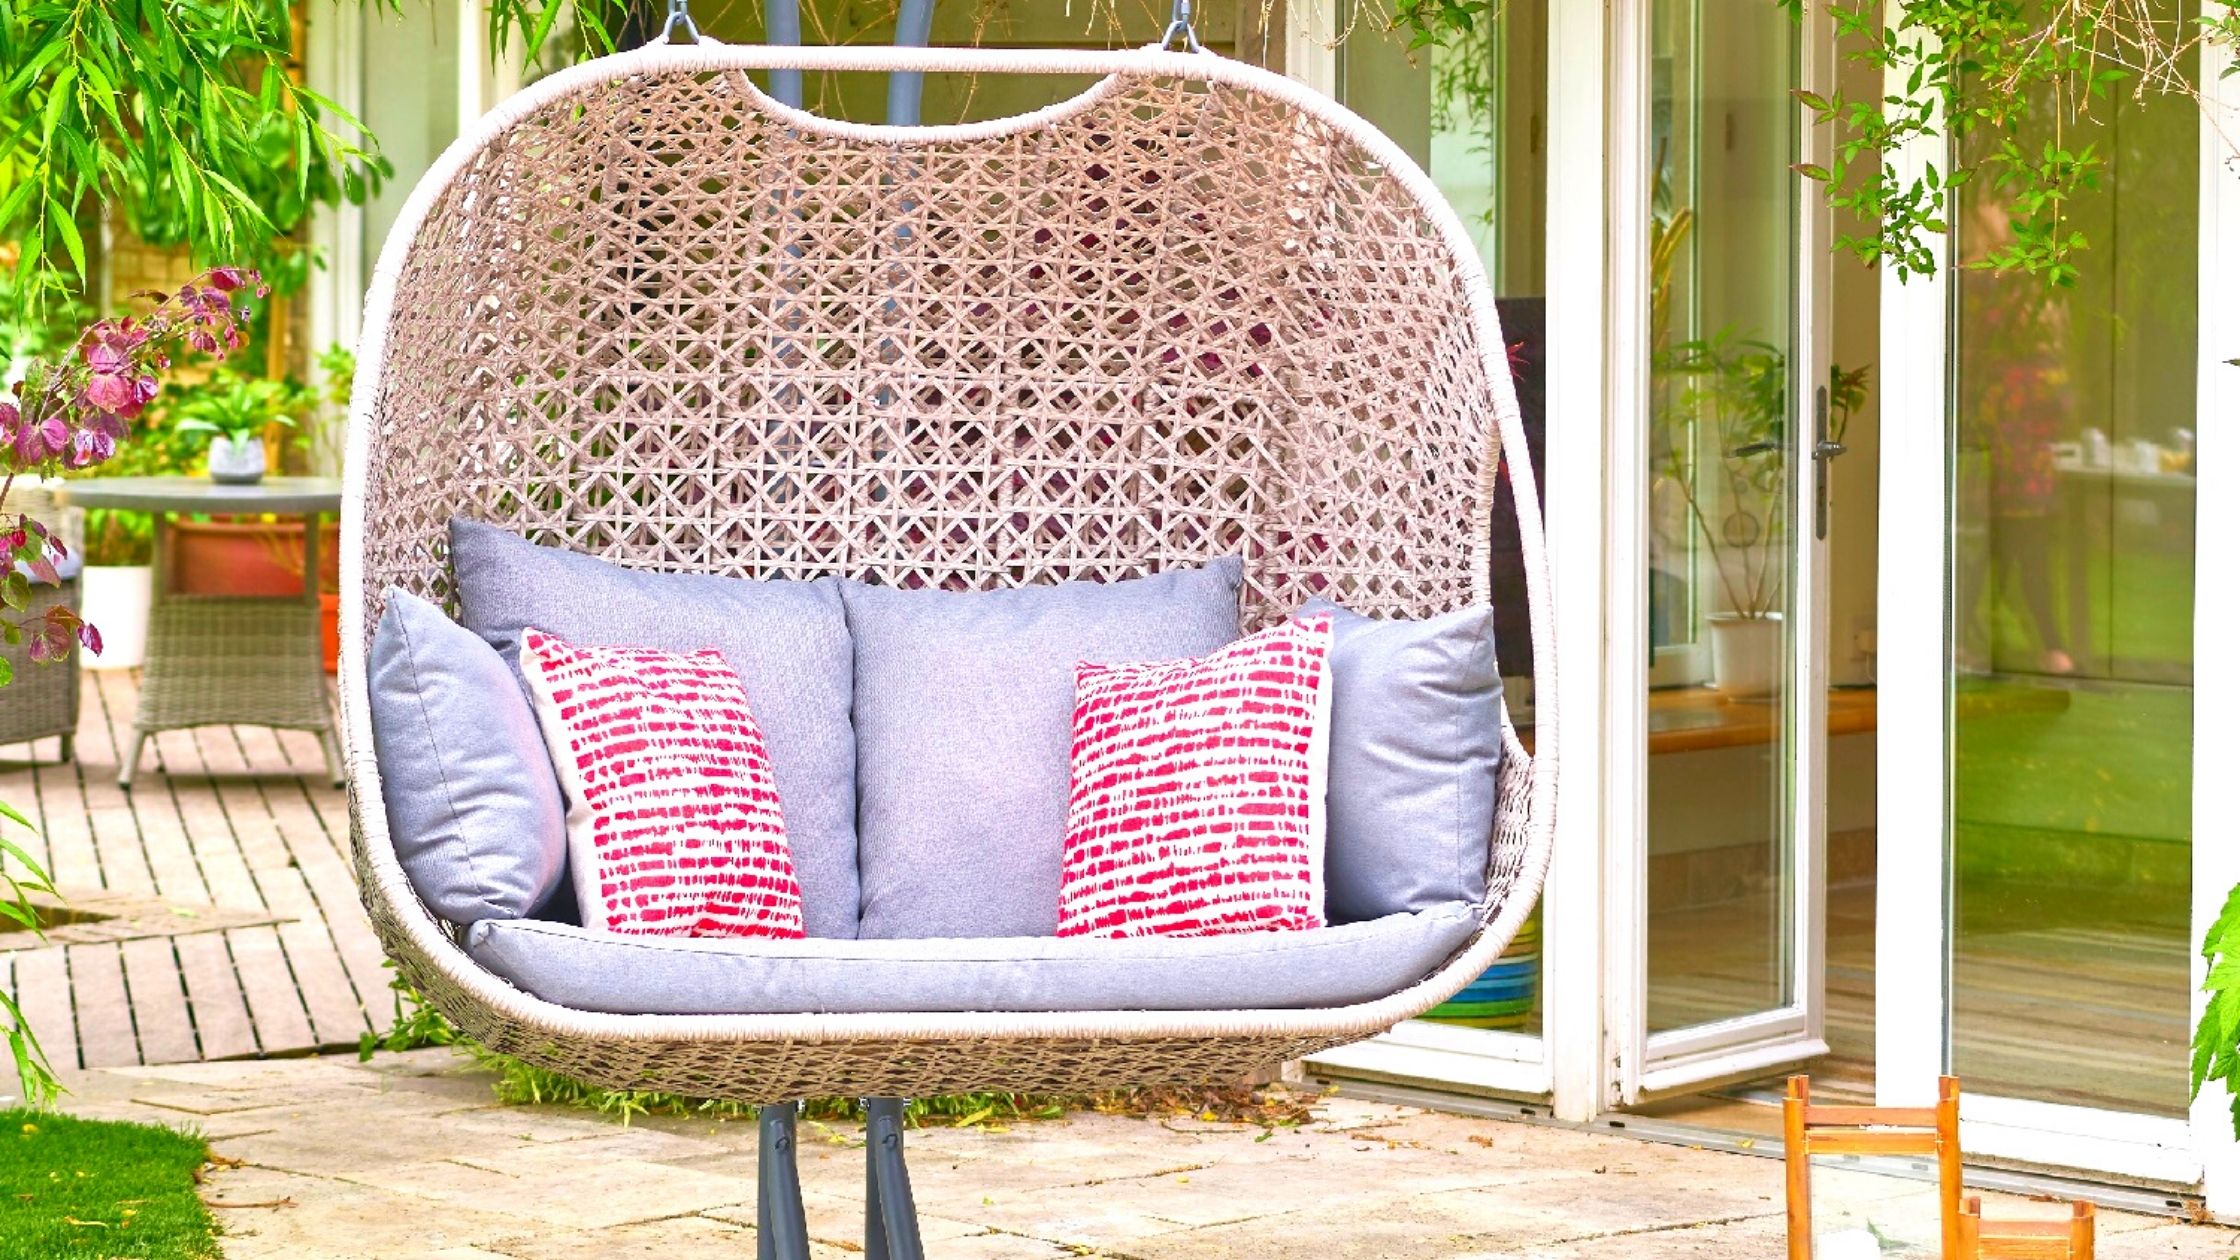 How to Make An Egg Chair the Focal Point of Your Back Garden | Blog | The Elms